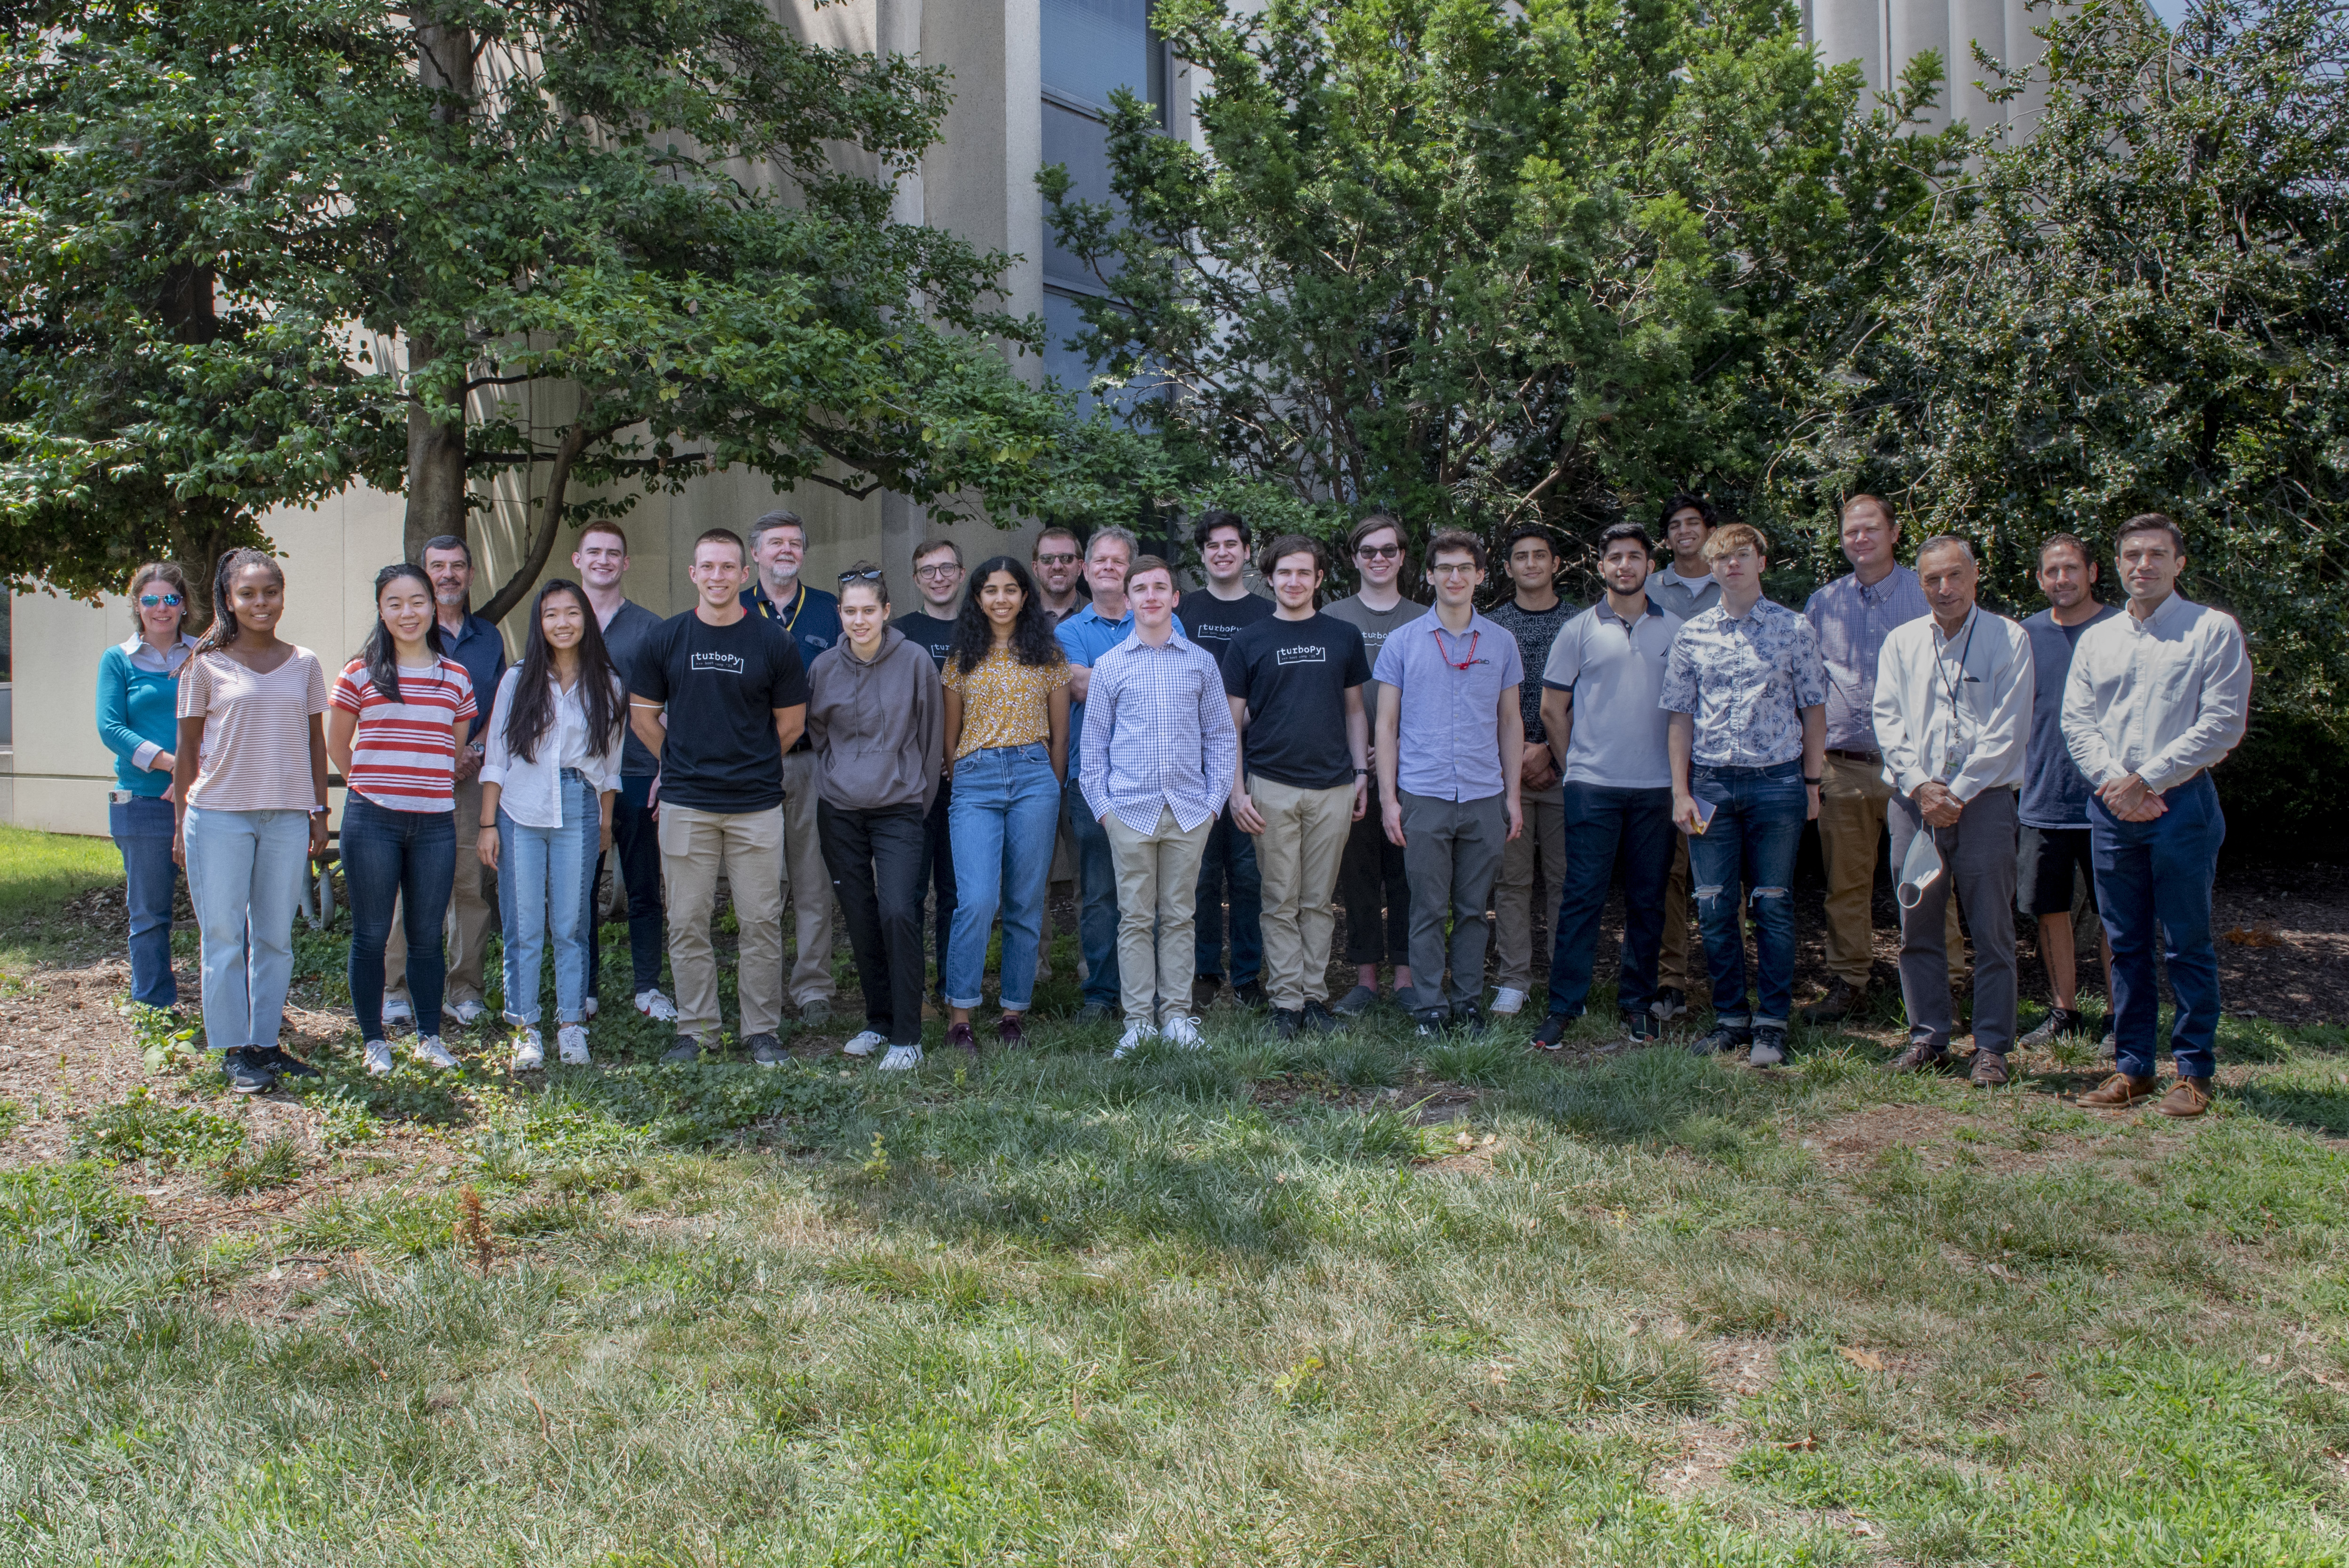 TurboPy interns and mentors gather for a group photo after taking a tour of the U.S. Naval Research Laboratory in Washington, D.C., Aug. 6, 2021. (U.S. Navy photo by Sarah Peterson)